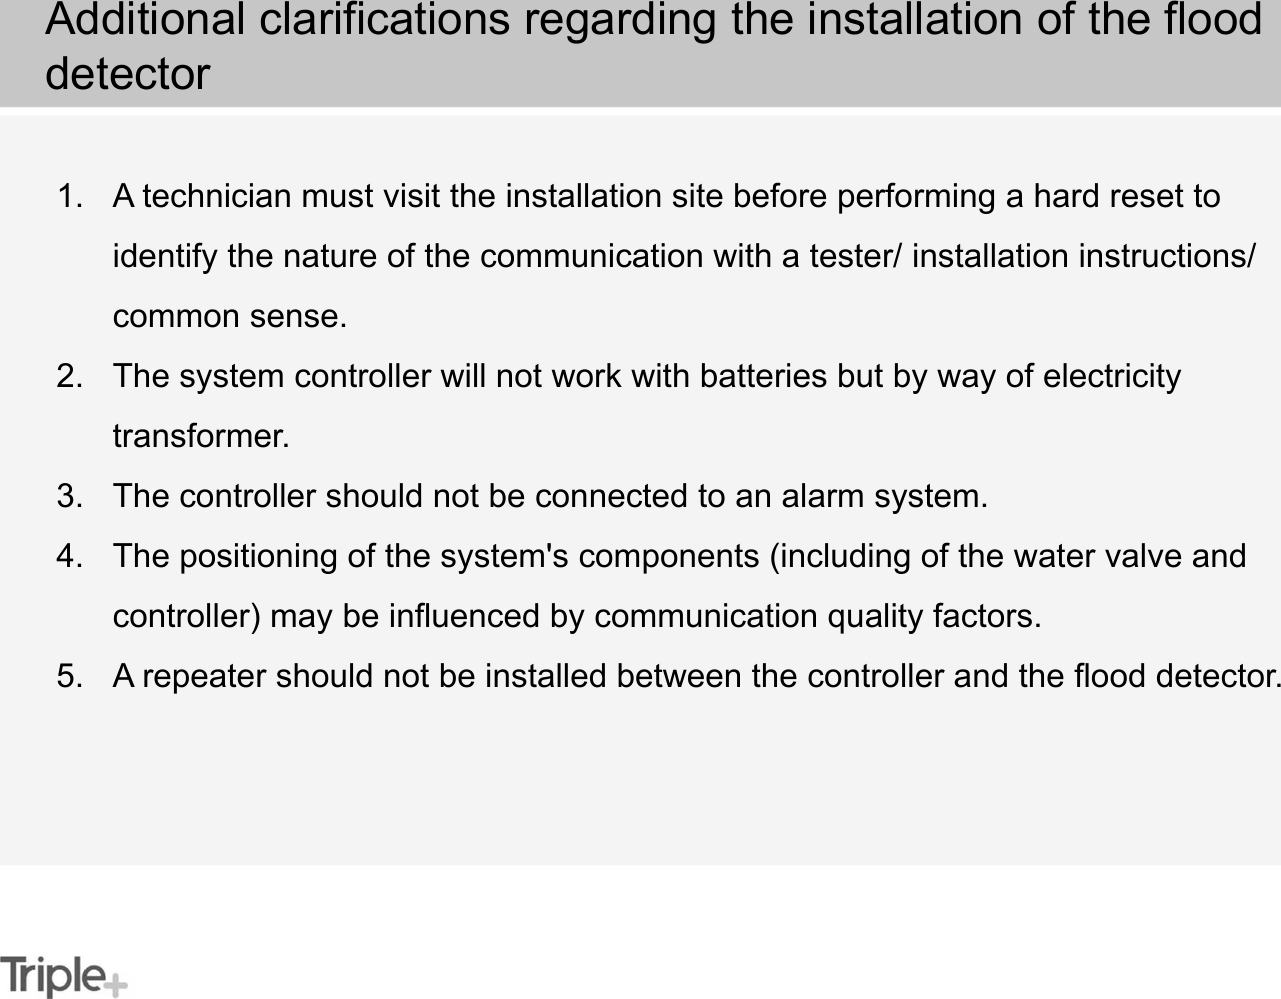 1. A technician must visit the installation site before performing a hard reset to identify the nature of the communication with a tester/ installation instructions/ common sense.2. The system controller will not work with batteries but by way of electricity transformer.3. The controller should not be connected to an alarm system.4. The positioning of the system&apos;s components (including of the water valve and controller) may be influenced by communication quality factors.5. A repeater should not be installed between the controller and the flood detector.Additional clarifications regarding the installation of the flood detector